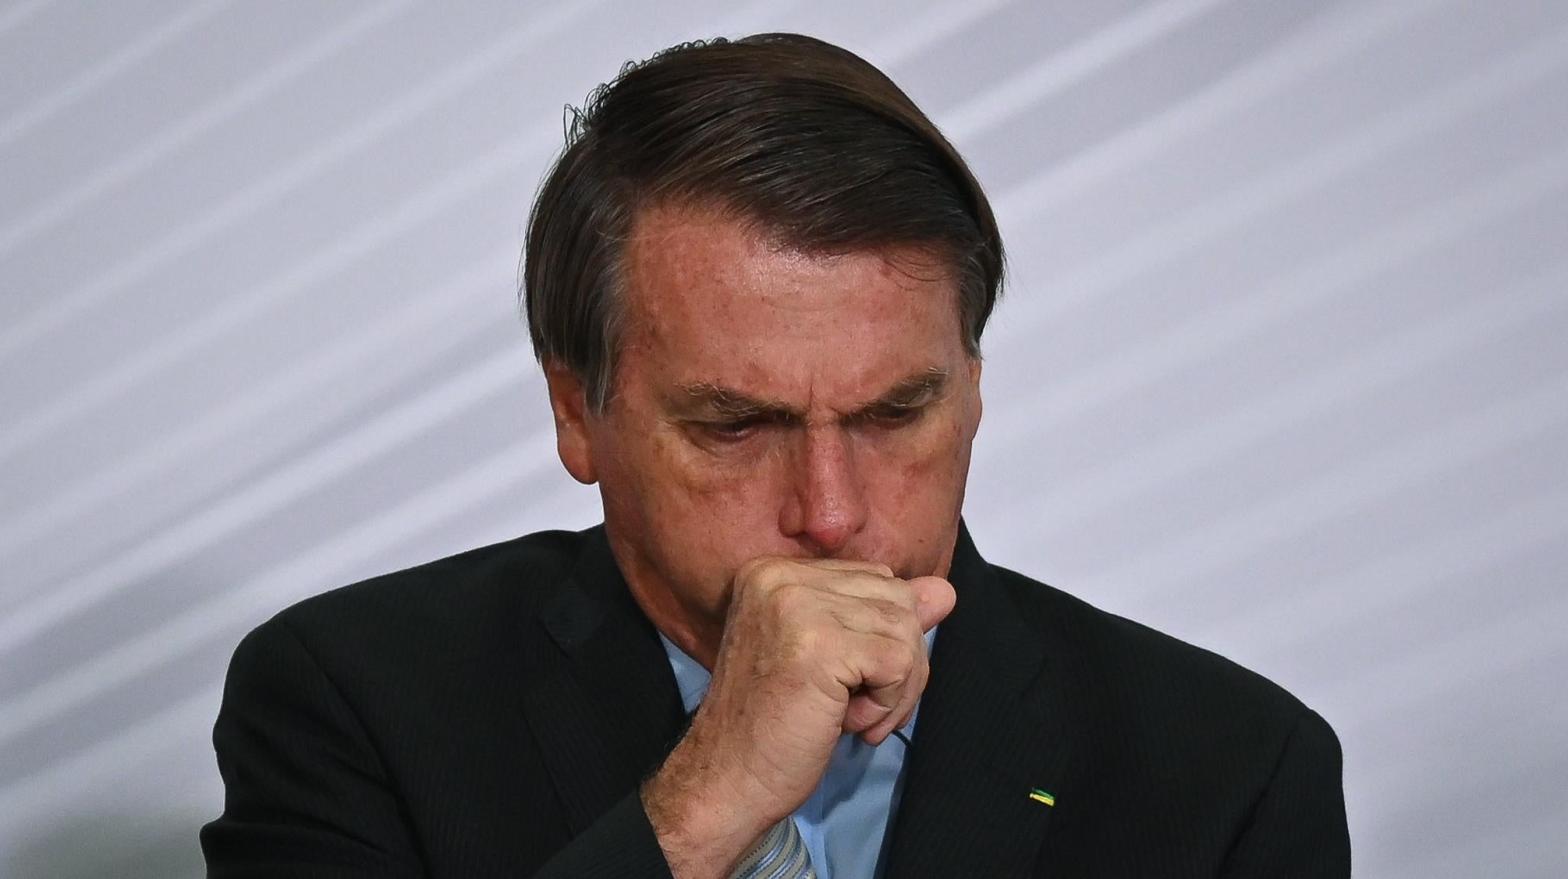 File photo showing President of Brazil Jair Bolsonaro coughing at Planalto Palace on December 9, 2020. (Photo: Andre Borges, Getty Images)